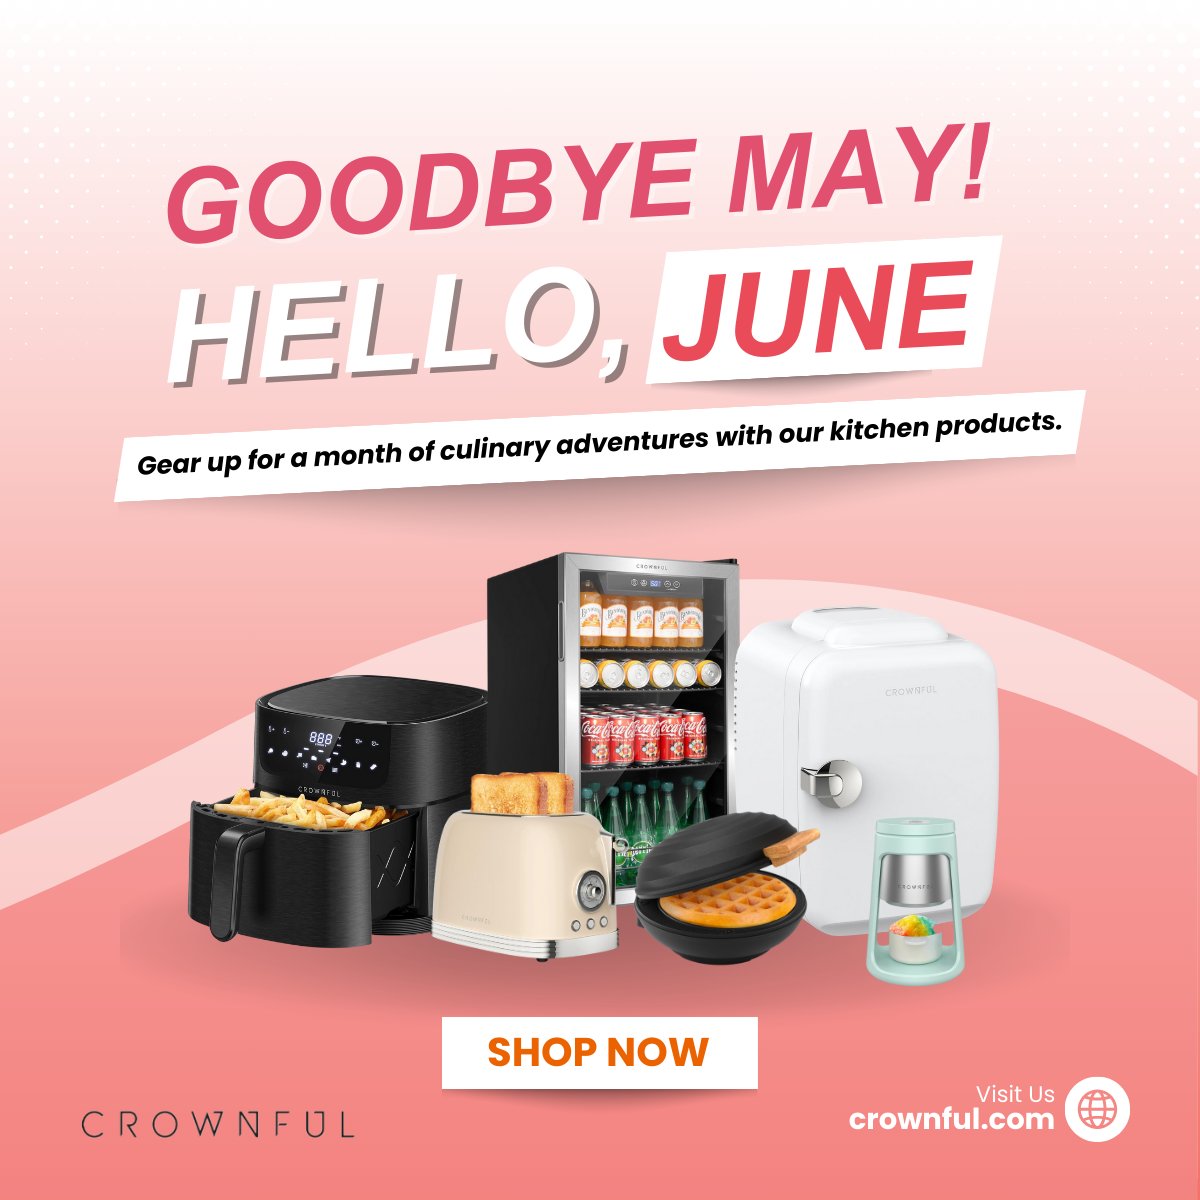 Hello June, bye May! Elevate your culinary game with Crownful's top-notch kitchen essentials. Let's make June sizzle! Order here: zurl.co/hGWA

 #CrownfulKitchen #HelloJune #GoodbyeMay